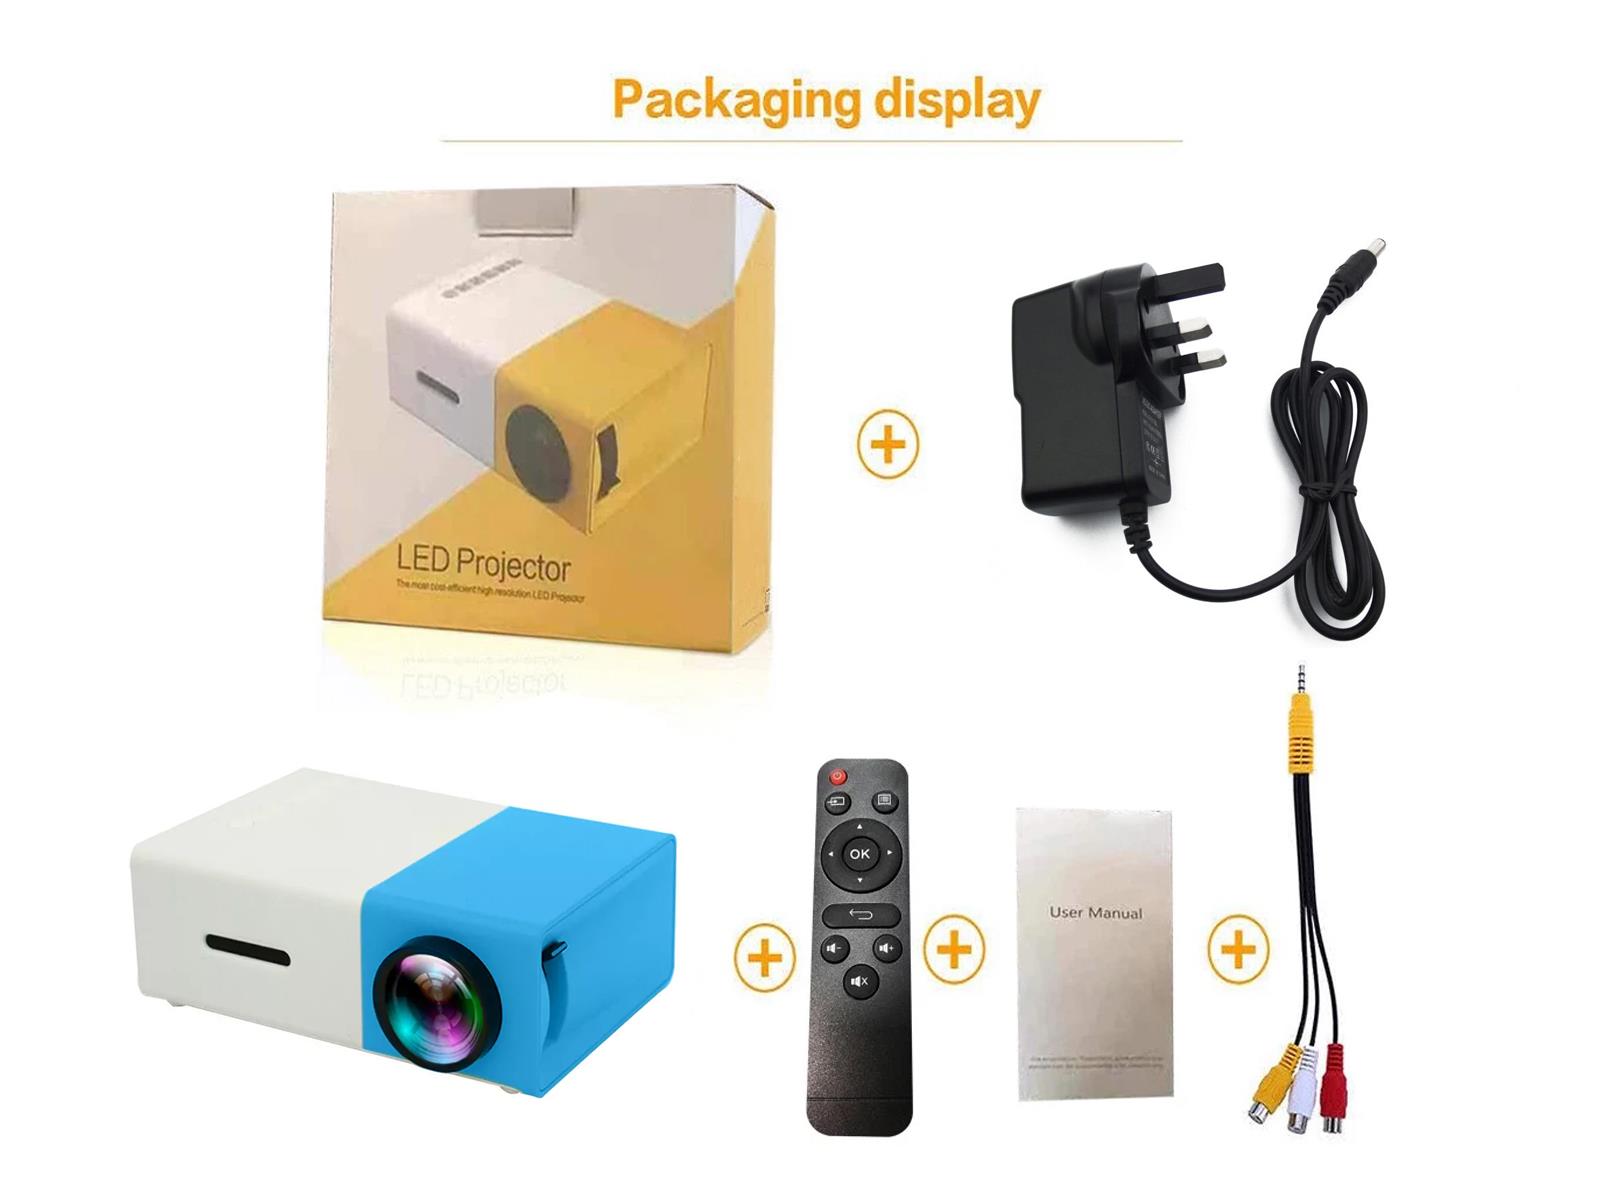 Mini Projector Packaging